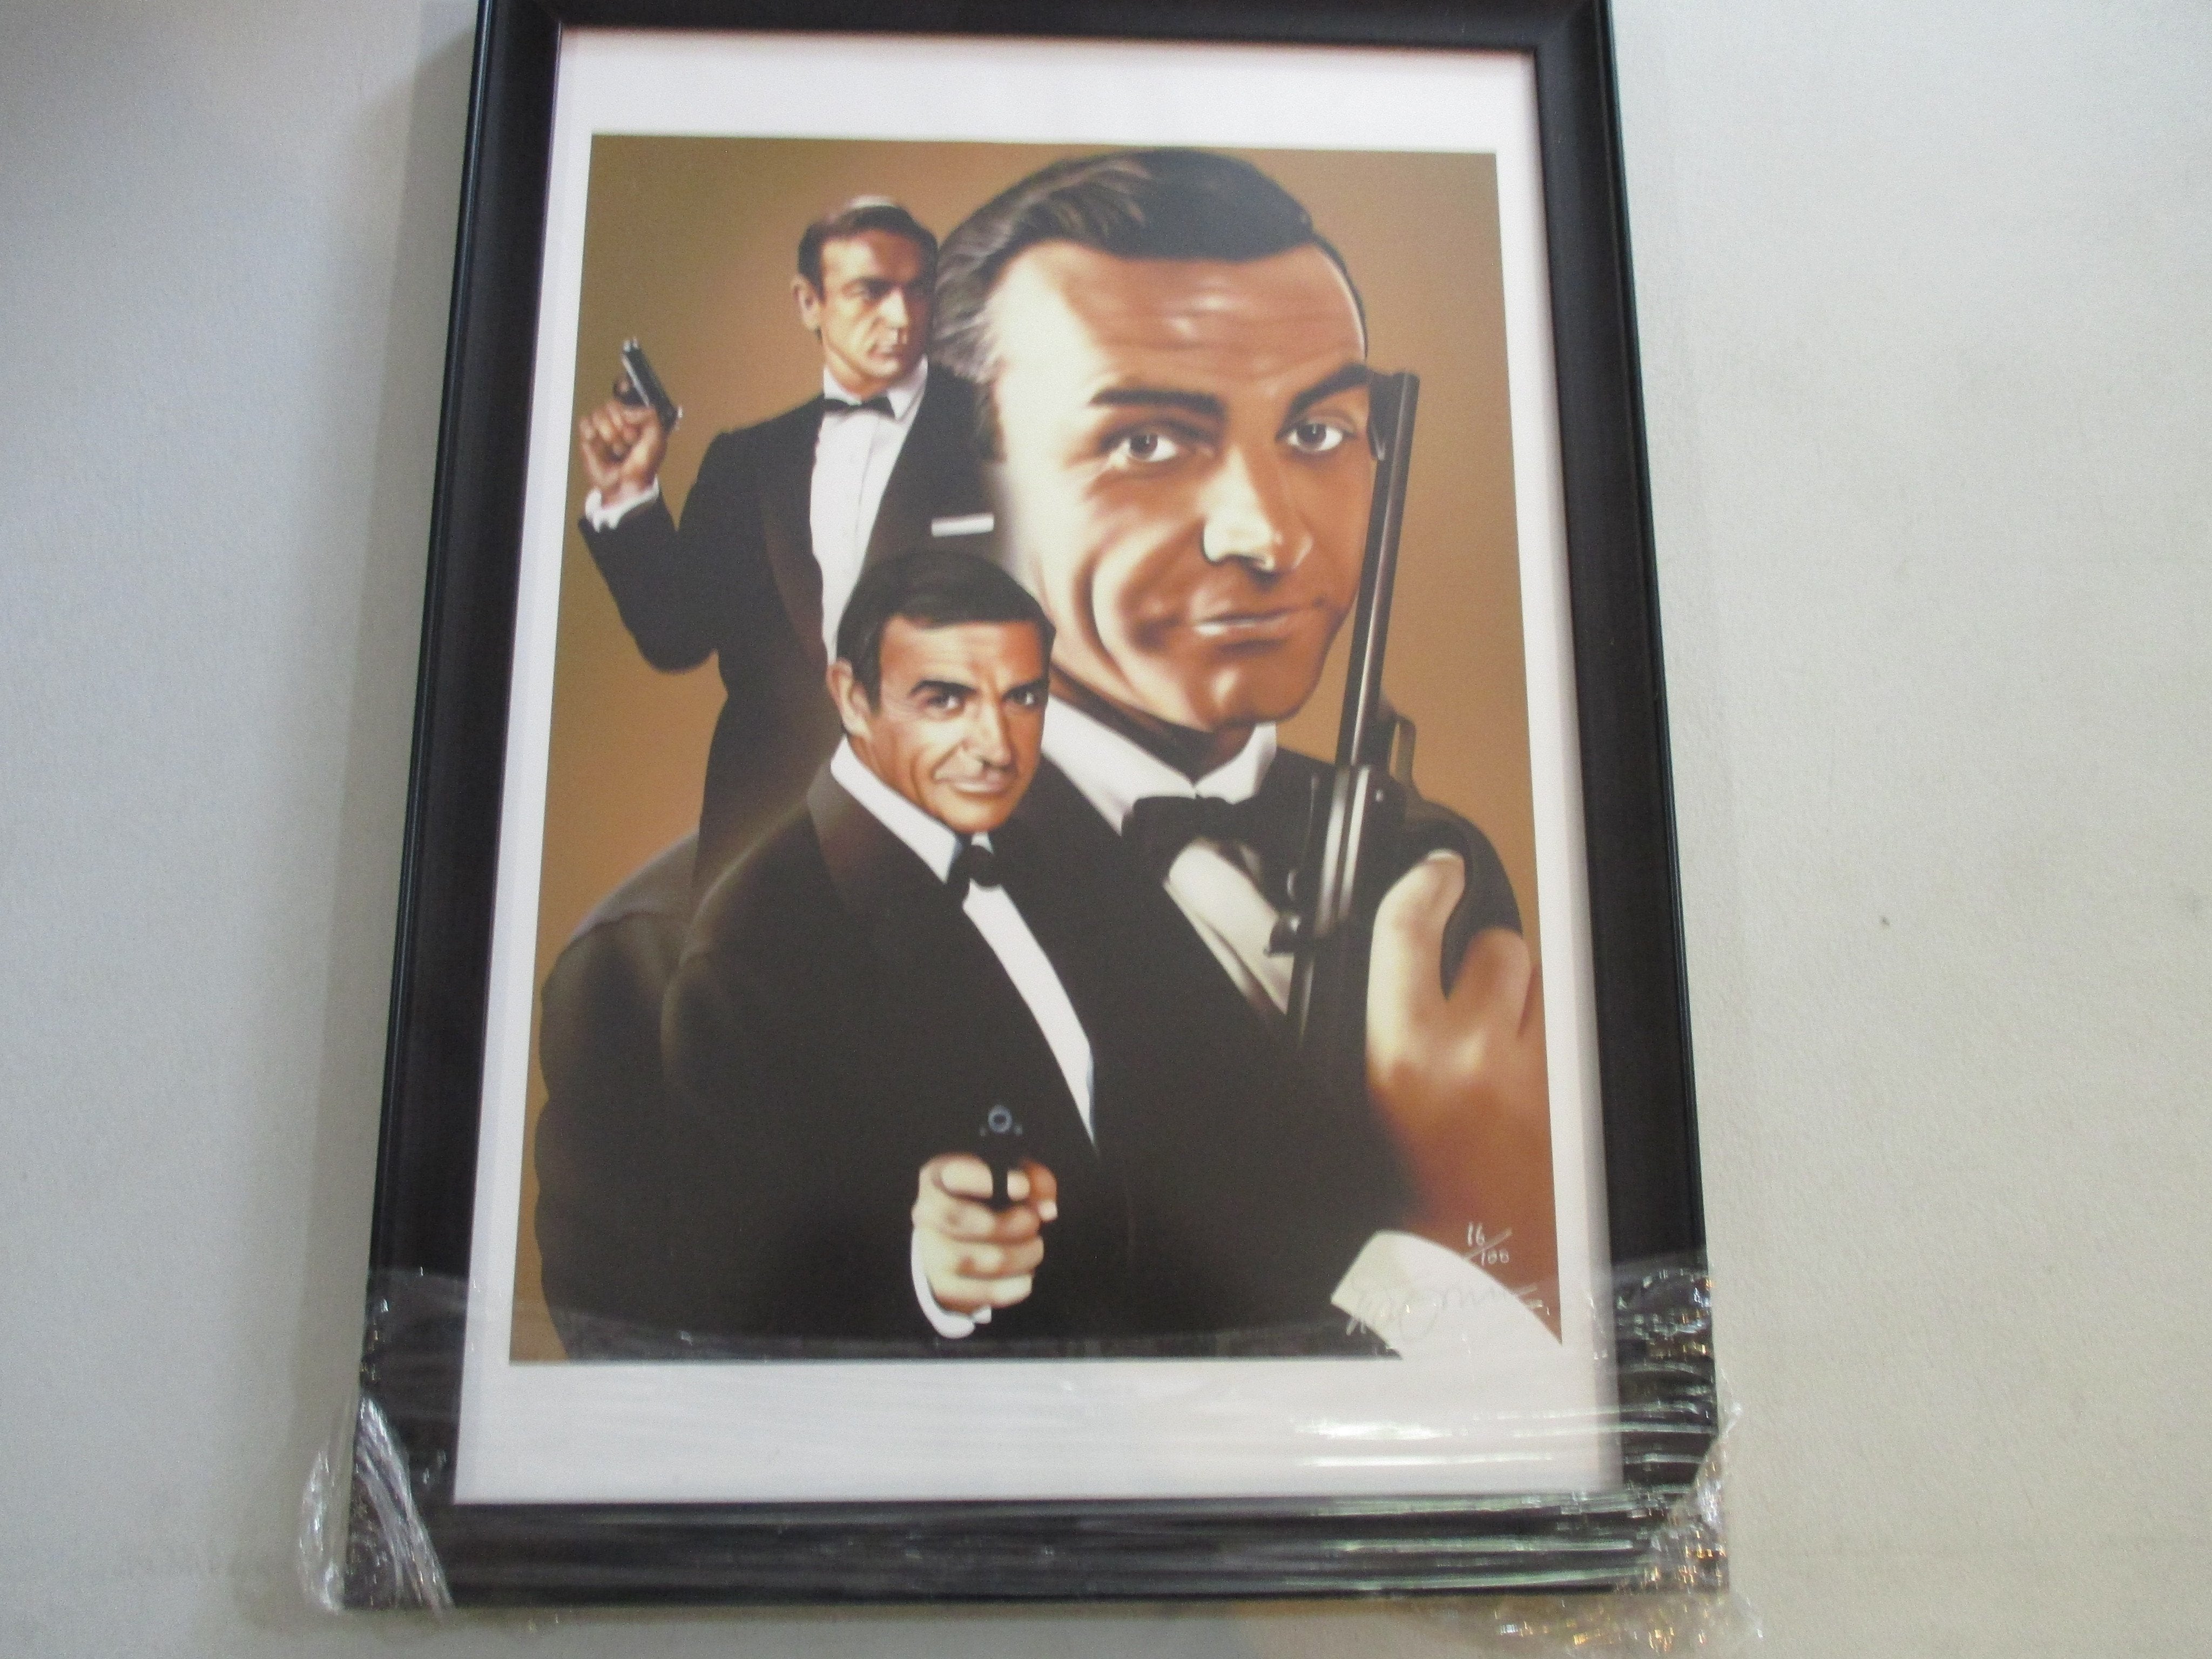 JAMES BOND-SEAN CONNERY LIMITED EDITION PRINT FRAMED - London Art and Souvenirs